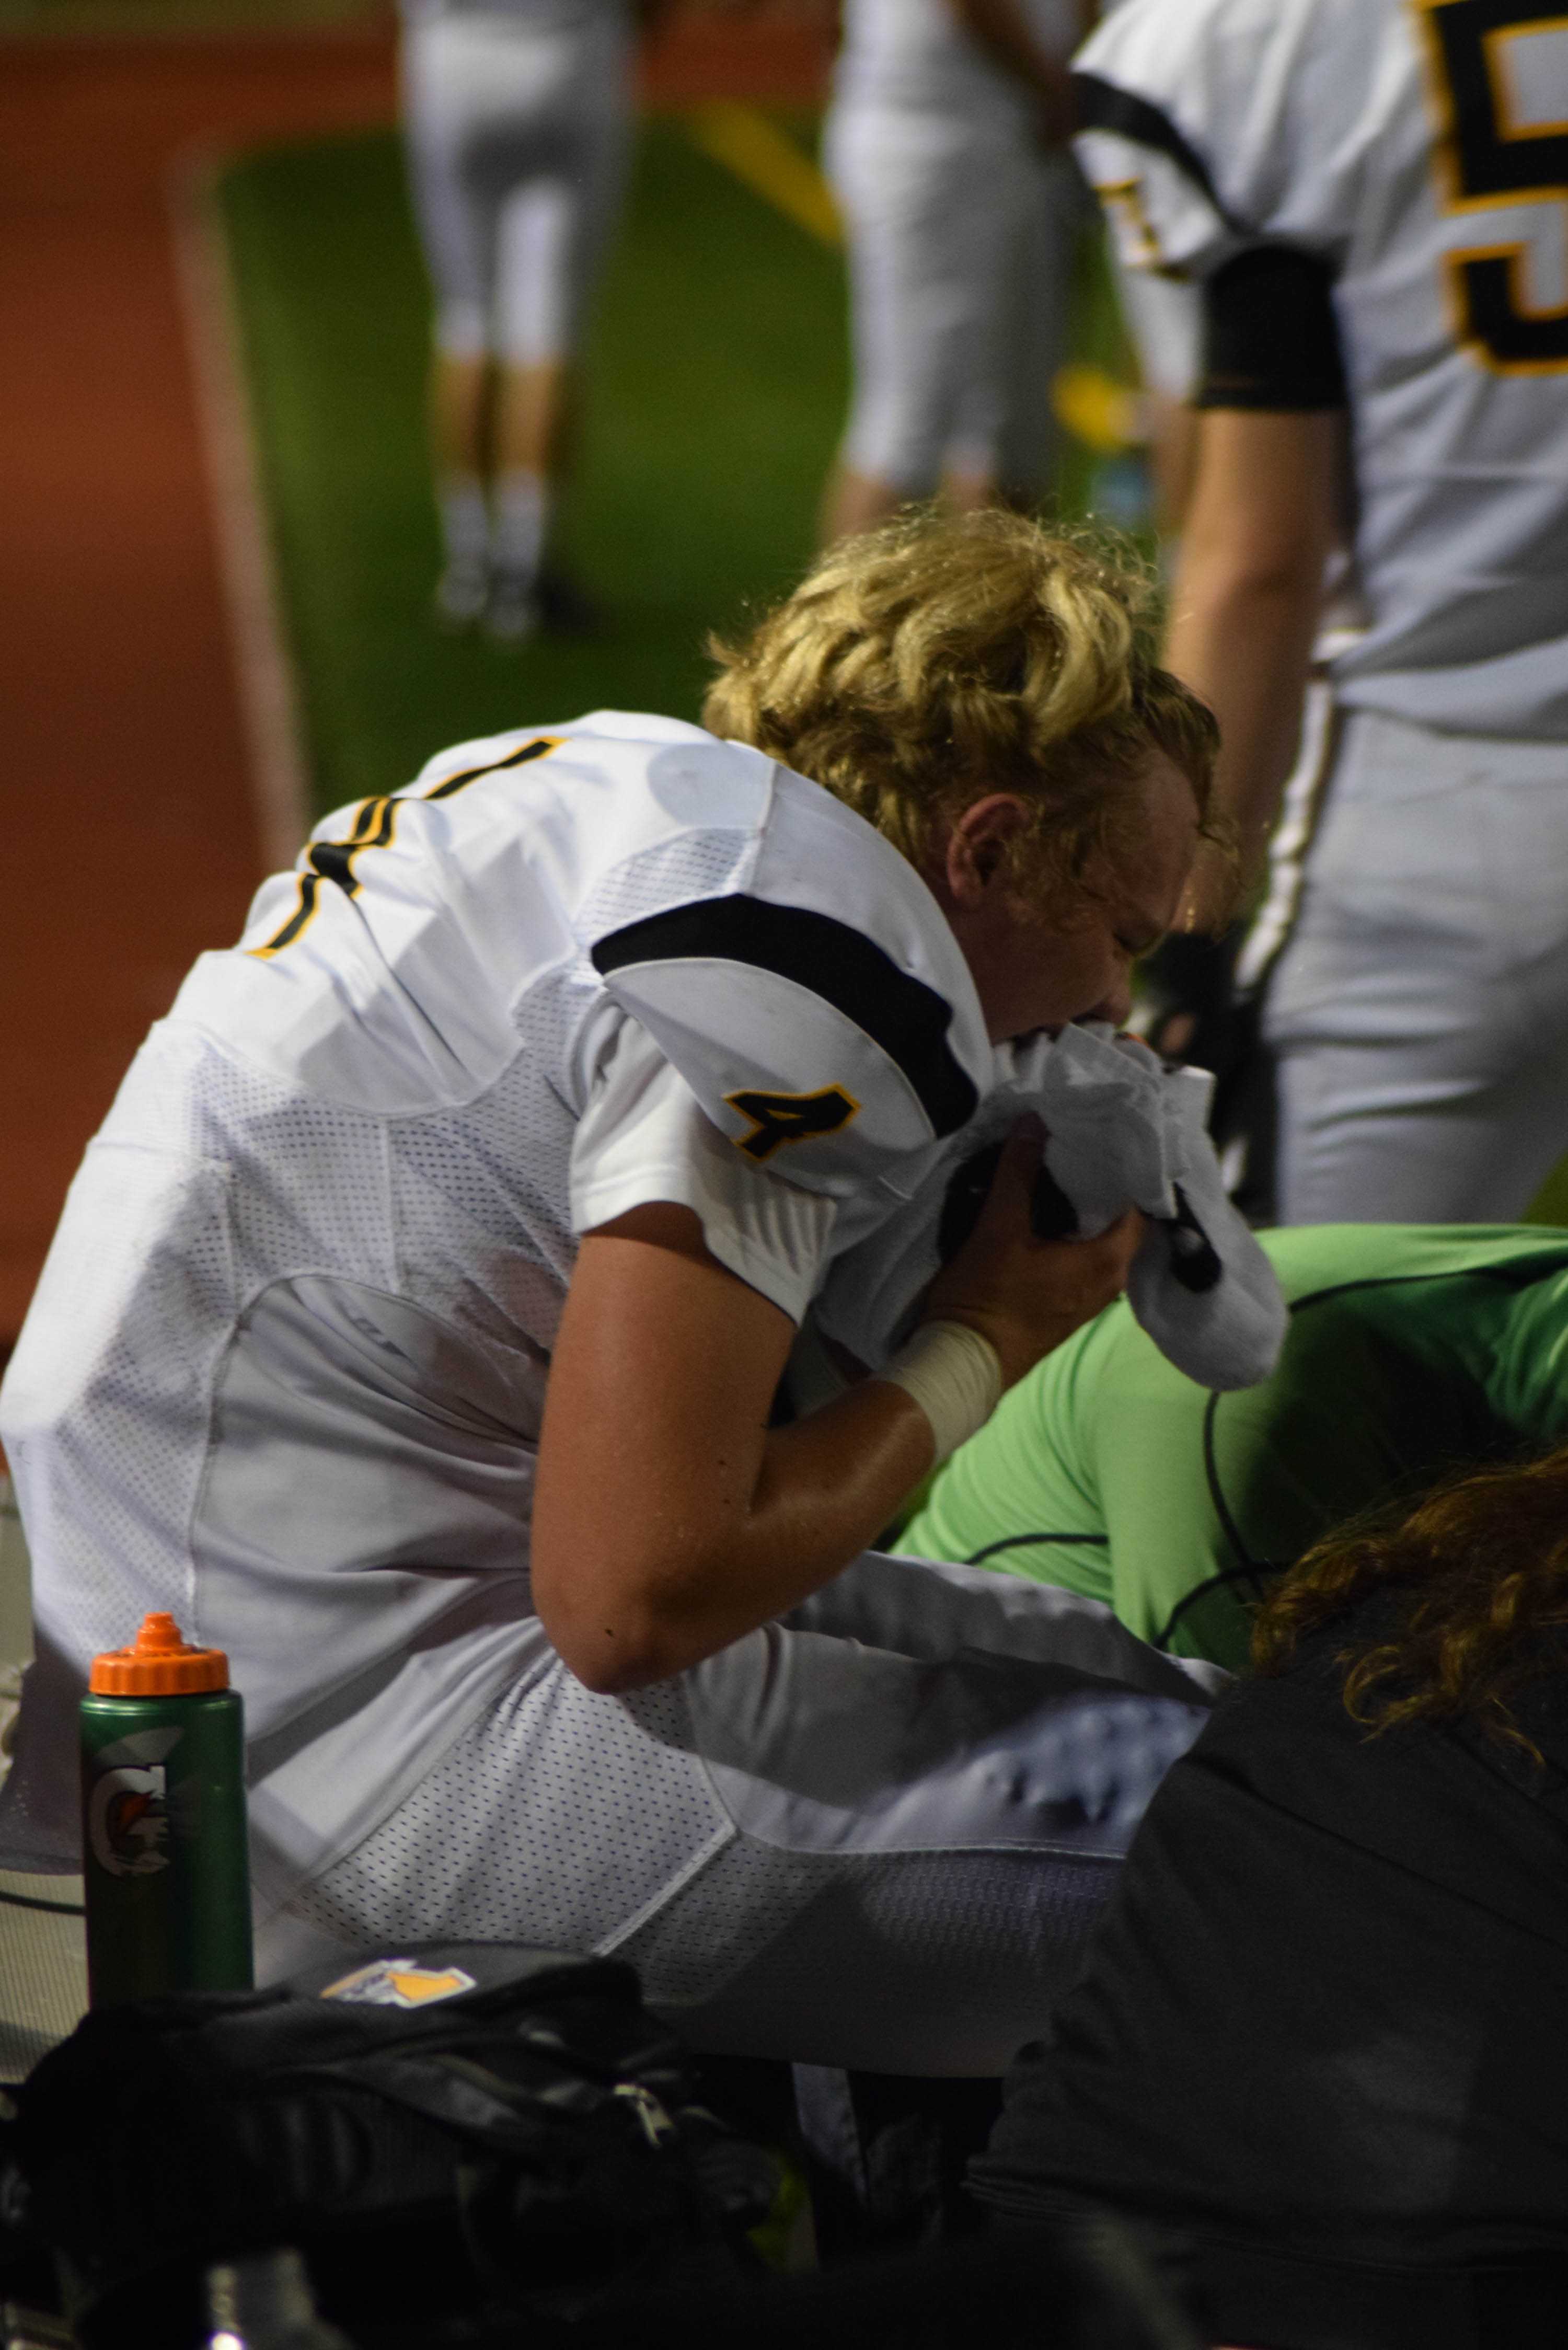 Senior+quarterback+Brayden+Mills+sits+on+the+sideline+after+breaking+his+fibula+and+dislocating+his+ankle+during+the+Vikings+game+at+Lake+Washington+on+Sept.+9.+The+team+has+had+many+injuries+this+season+and+hopes+that+they+can+succeed+despite+these+setbacks.+Inglemoor+went+on+to+lose+the+game+31-21.+